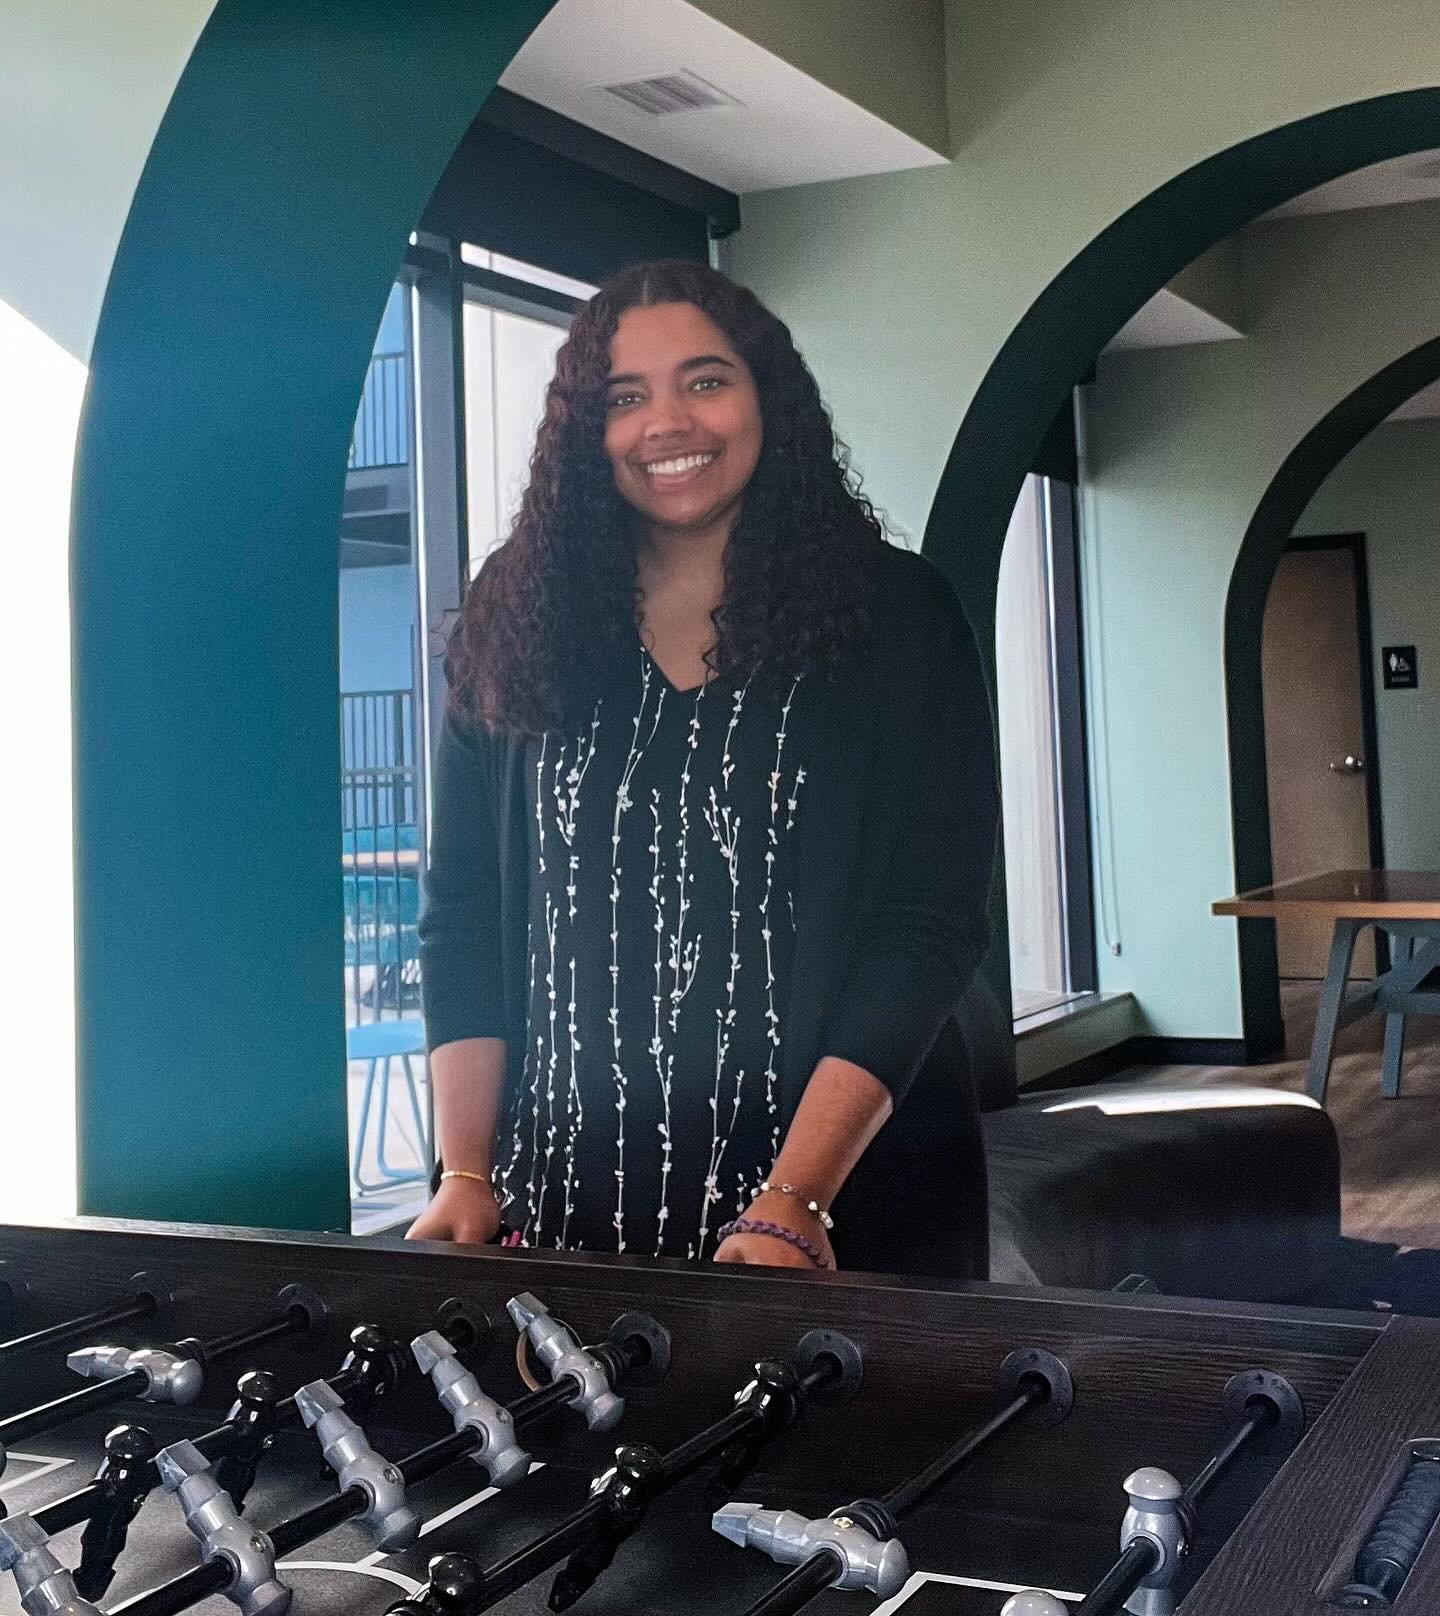 #FinallyFriday 🤩
After a long finals week, it&rsquo;s important to have some fun! Our club room is available for you and friends to enjoy, play, and relax! Comment if you think you&rsquo;d win in a game of foosball ⬇️